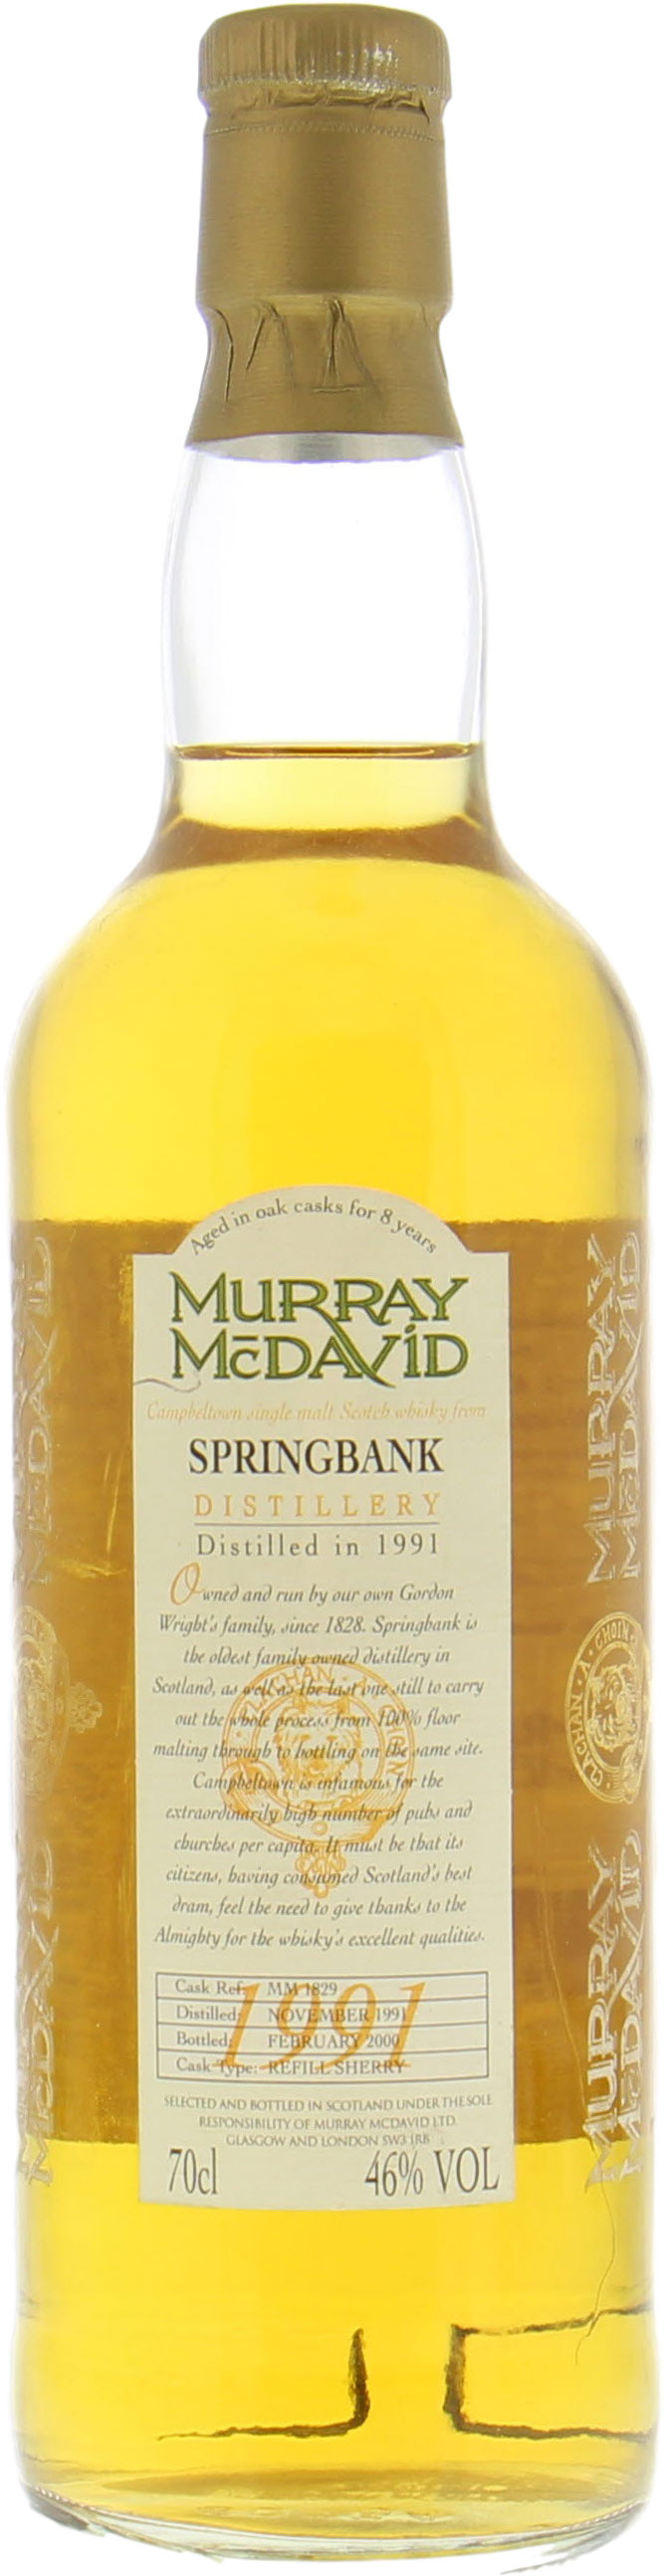 Springbank - 8 Years Old Murray McDavid Cask MM1829 46% 1991 No Original Container